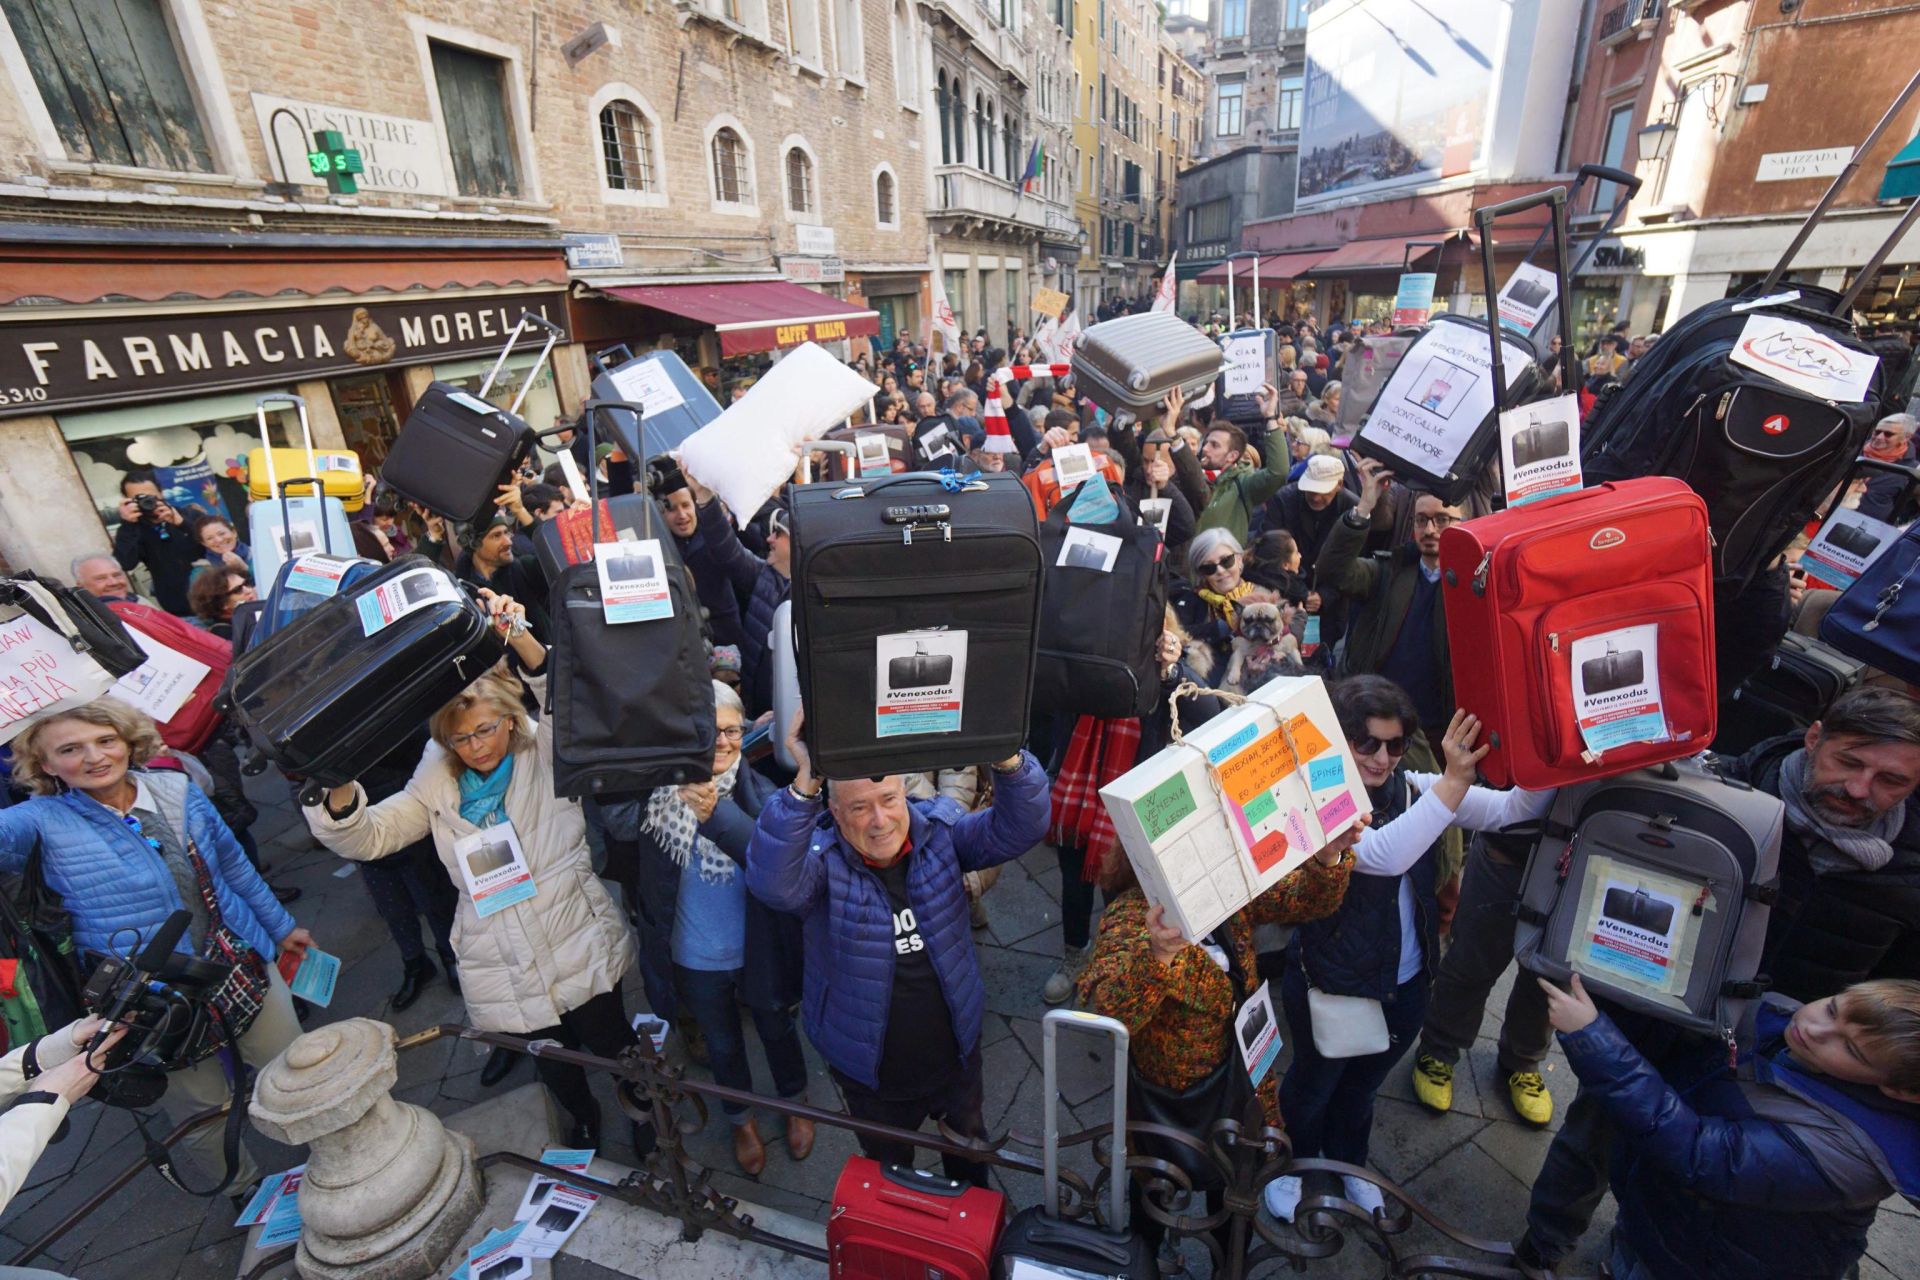 epa05628204 Residents of Venice hold luggages during the 'Venexodus' demonstrations in Venice, Italy, 12 November 2016. Venetians protest against the increasing number of tourists in Venice.  EPA/ANDREA MEROLA